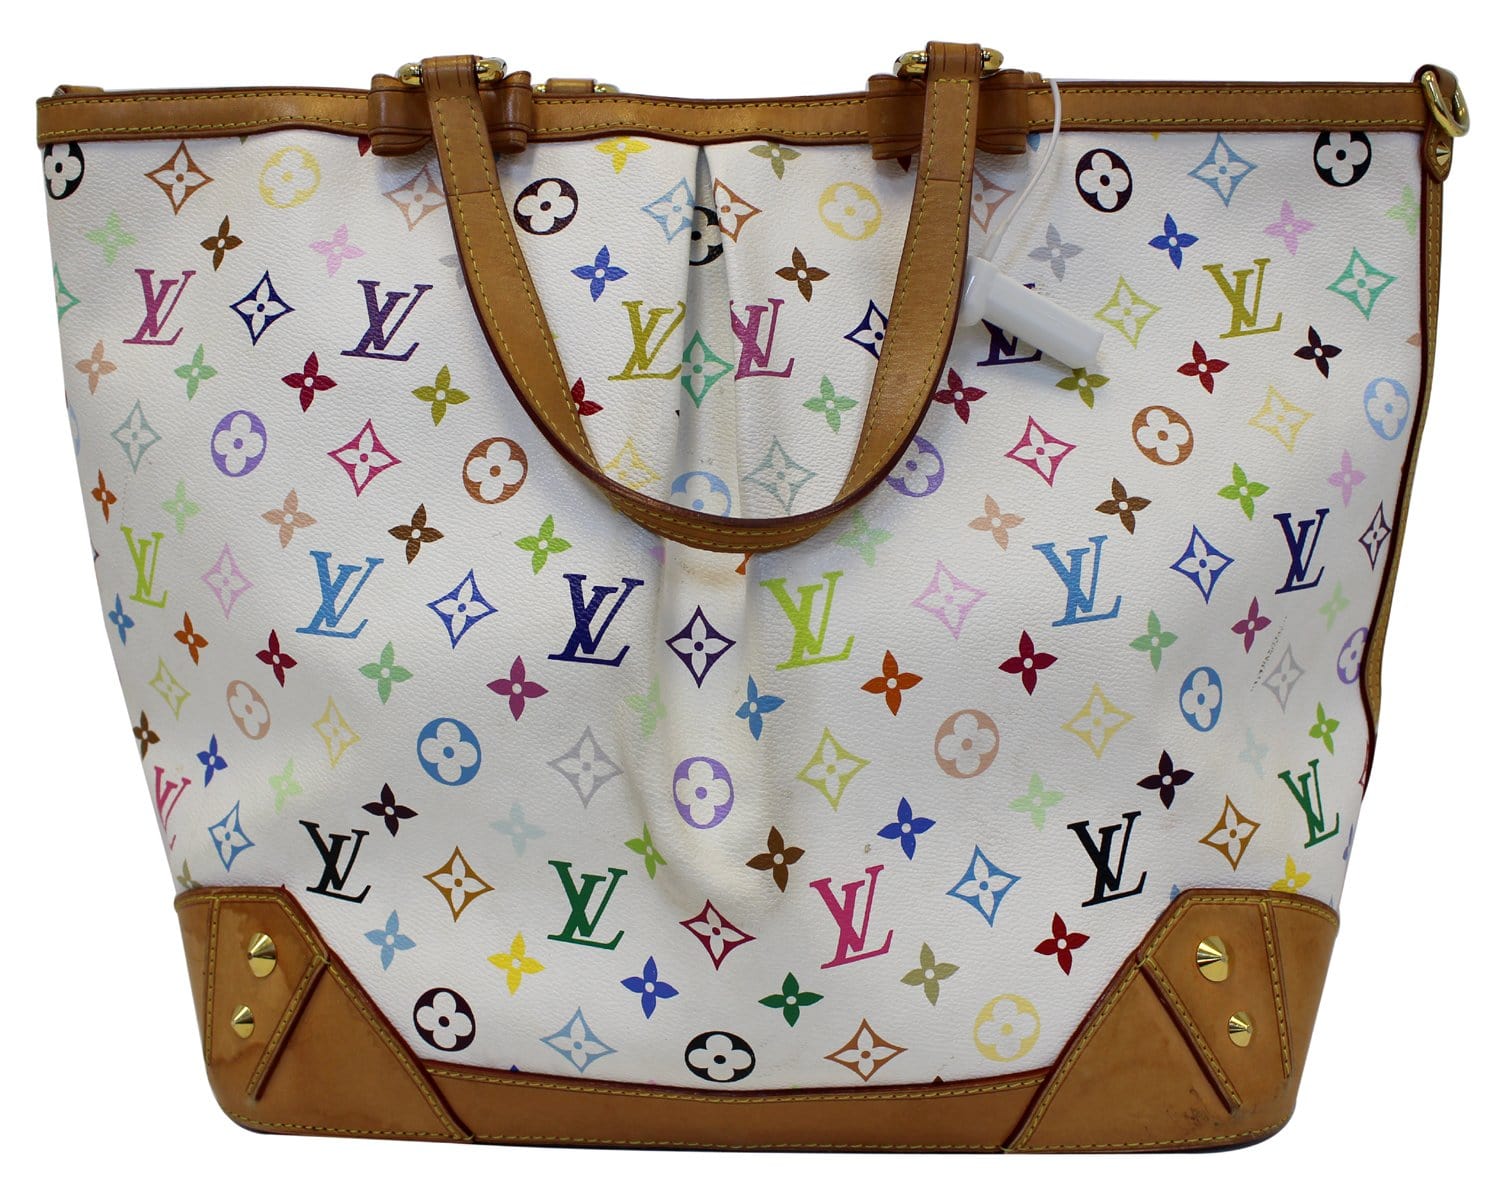 Louis Vuitton Black Multicolor Sharleen MM Tote at Jill's Consignment